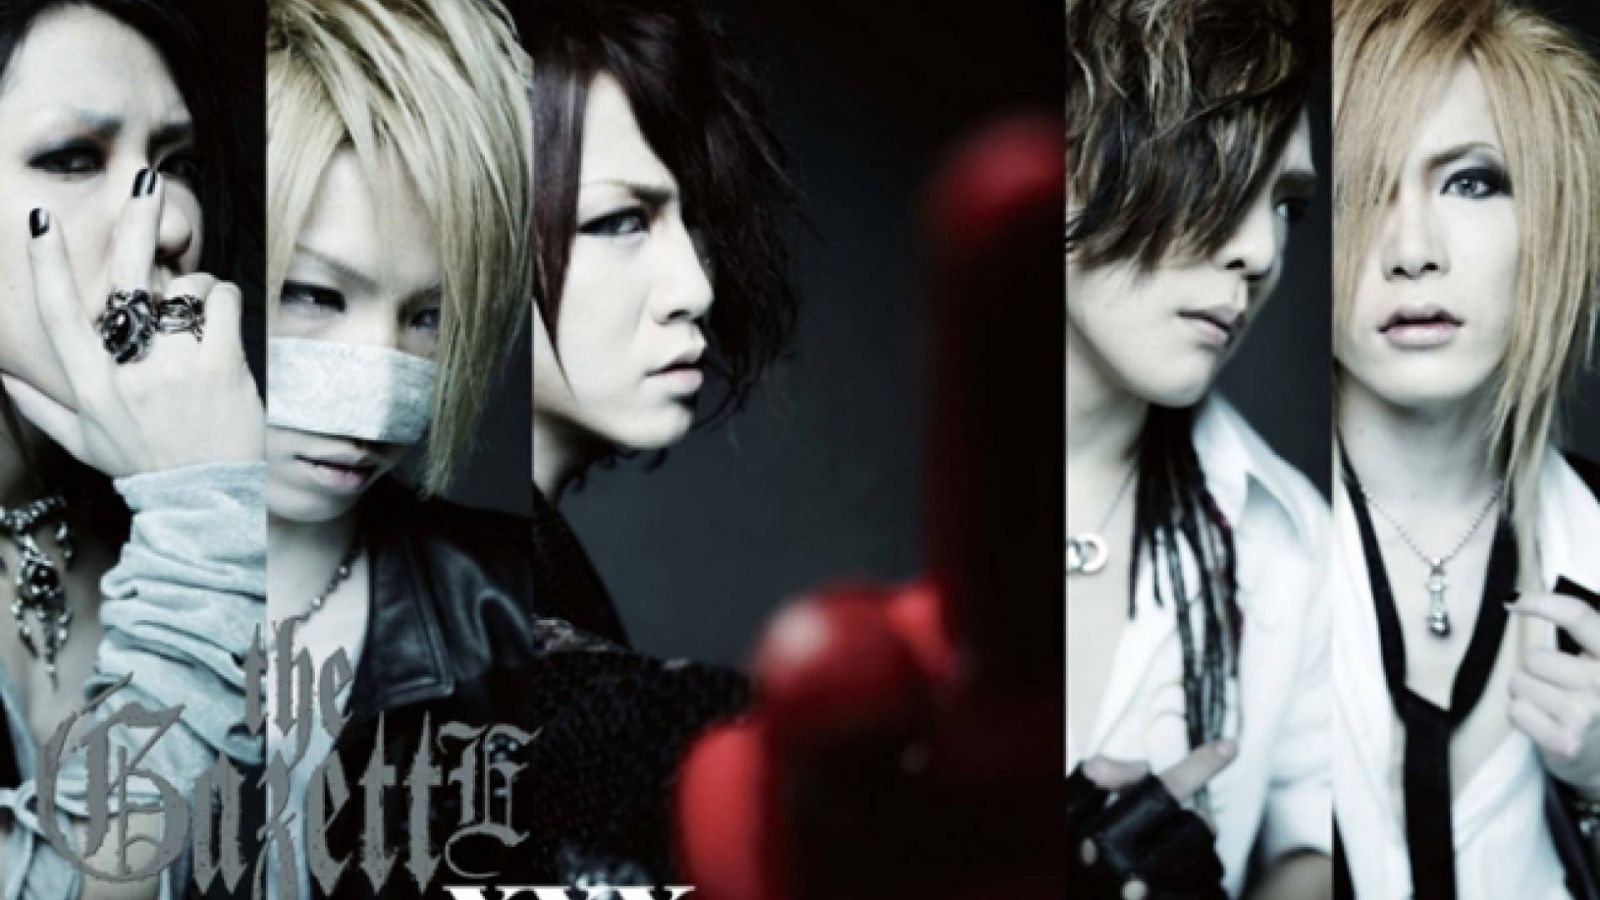 Zy 49: the GazettE © 2009 Zy.connection Inc. All Rights Reserved.